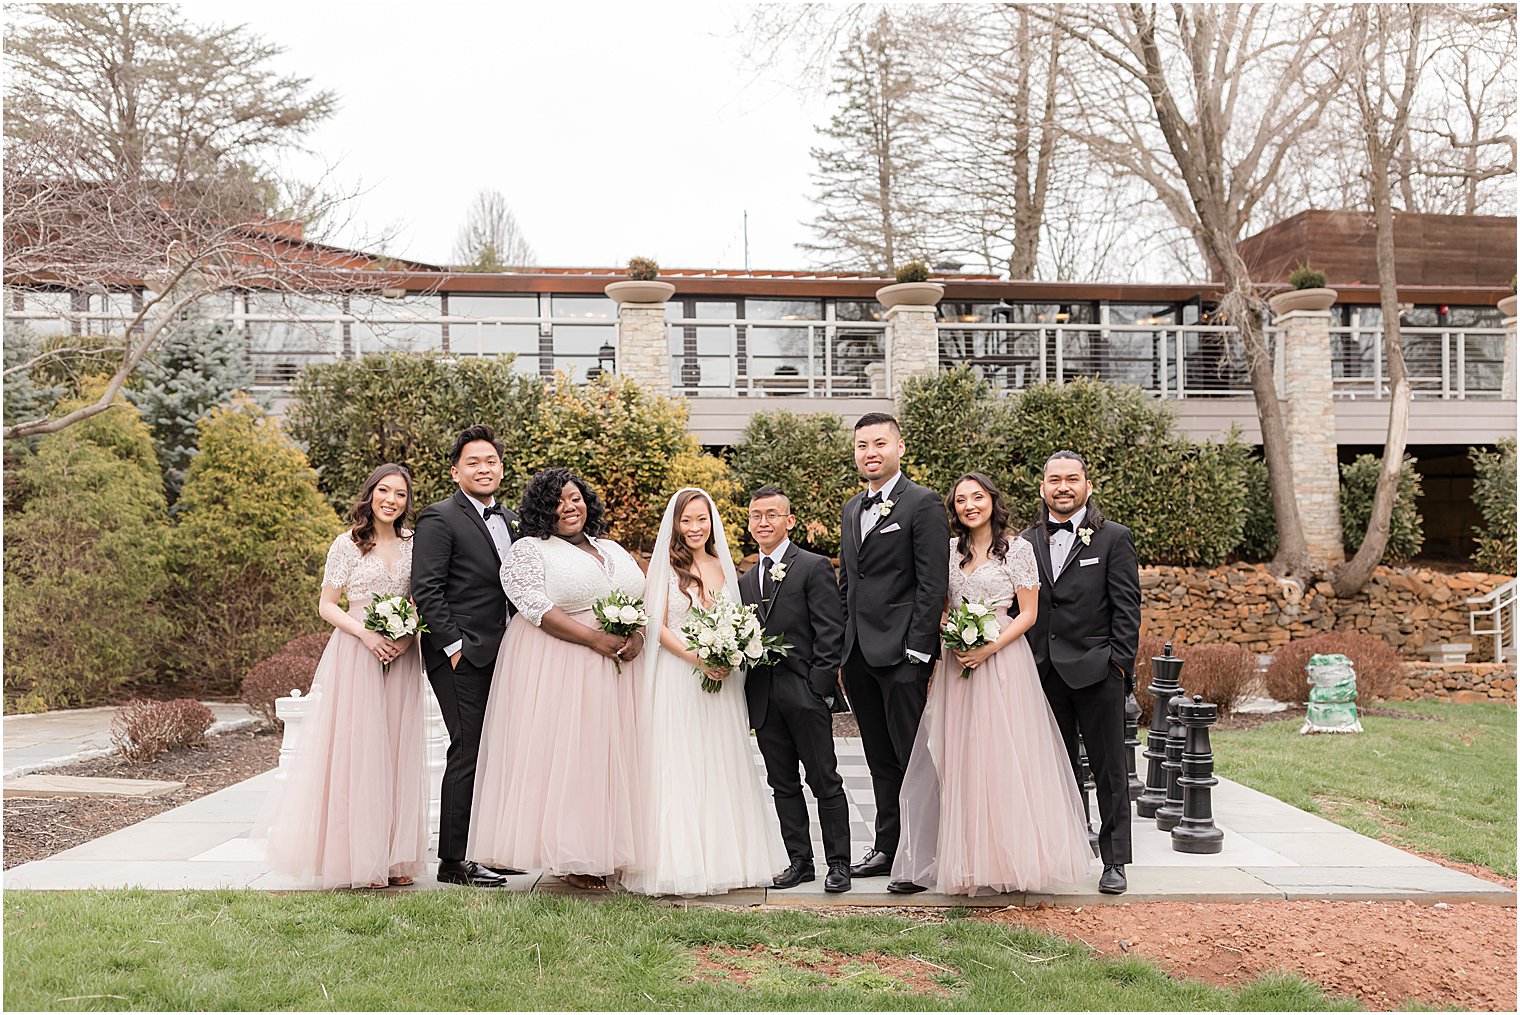 newlyweds pose with wedding party in pink and black